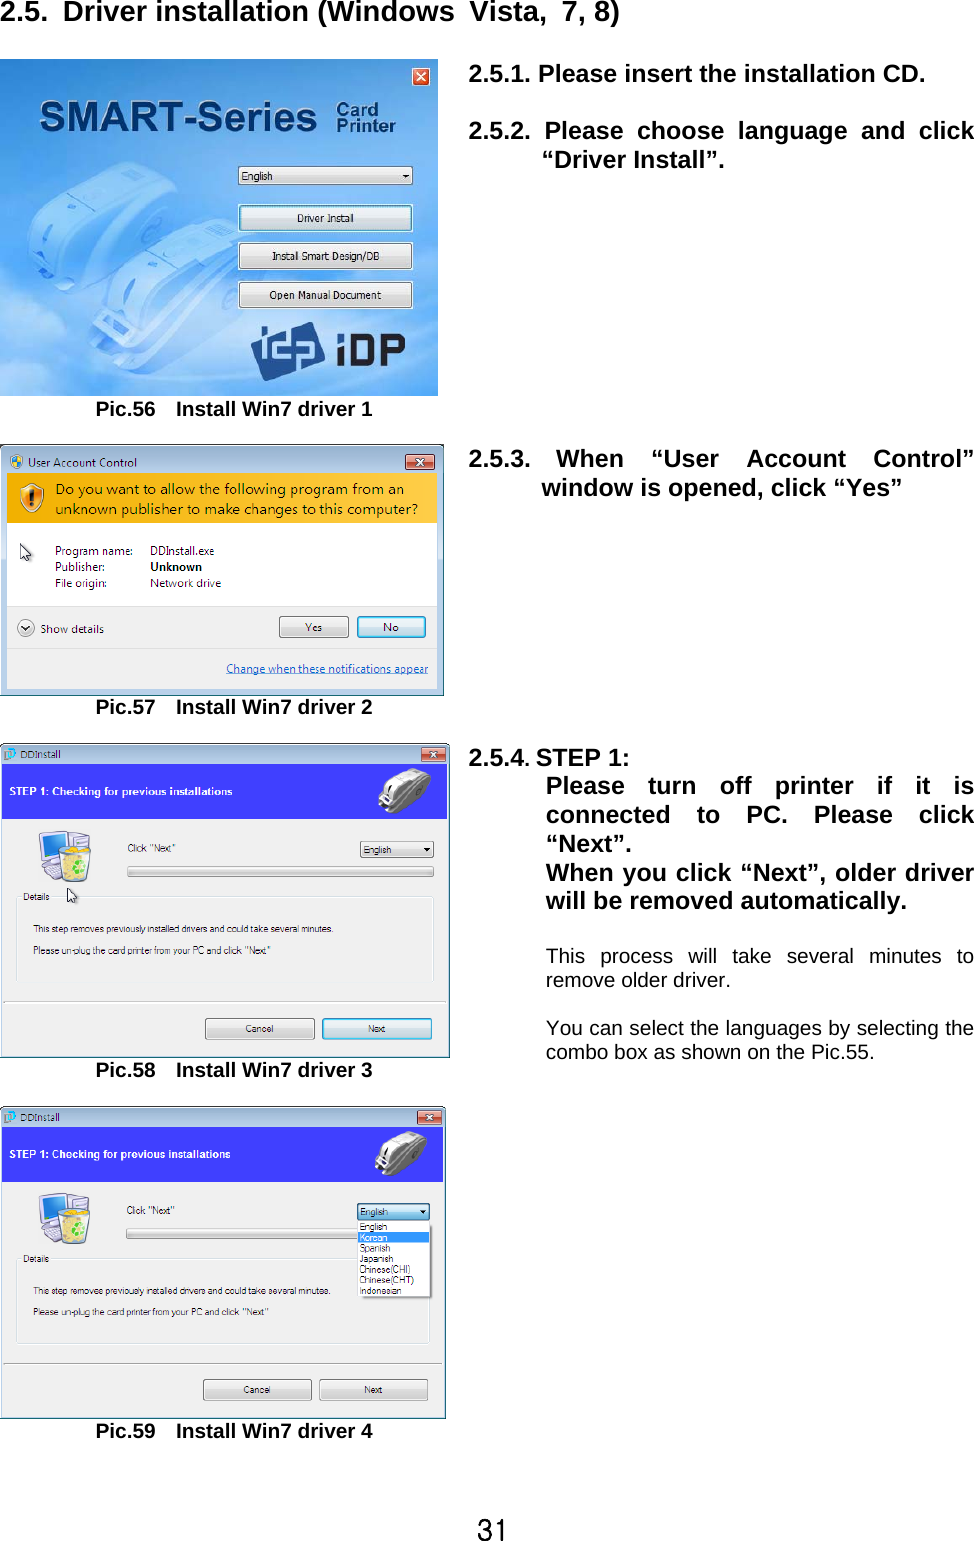 31 2.5. Driver installation (Windows Vista, 7, 8)    Pic.56    Install Win7 driver 1  2.5.1. Please insert the installation CD.    2.5.2. Please choose language and click“Driver Install”.    Pic.57    Install Win7 driver 2  2.5.3. When “User Account Control”window is opened, click “Yes”    Pic.58    Install Win7 driver 3   Pic.59    Install Win7 driver 4 2.5.4. STEP 1:   Please turn off printer if it isconnected to PC. Please click“Next”. When you click “Next”, older driverwill be removed automatically.    This process will take several minutes toremove older driver.  You can select the languages by selecting thecombo box as shown on the Pic.55.     